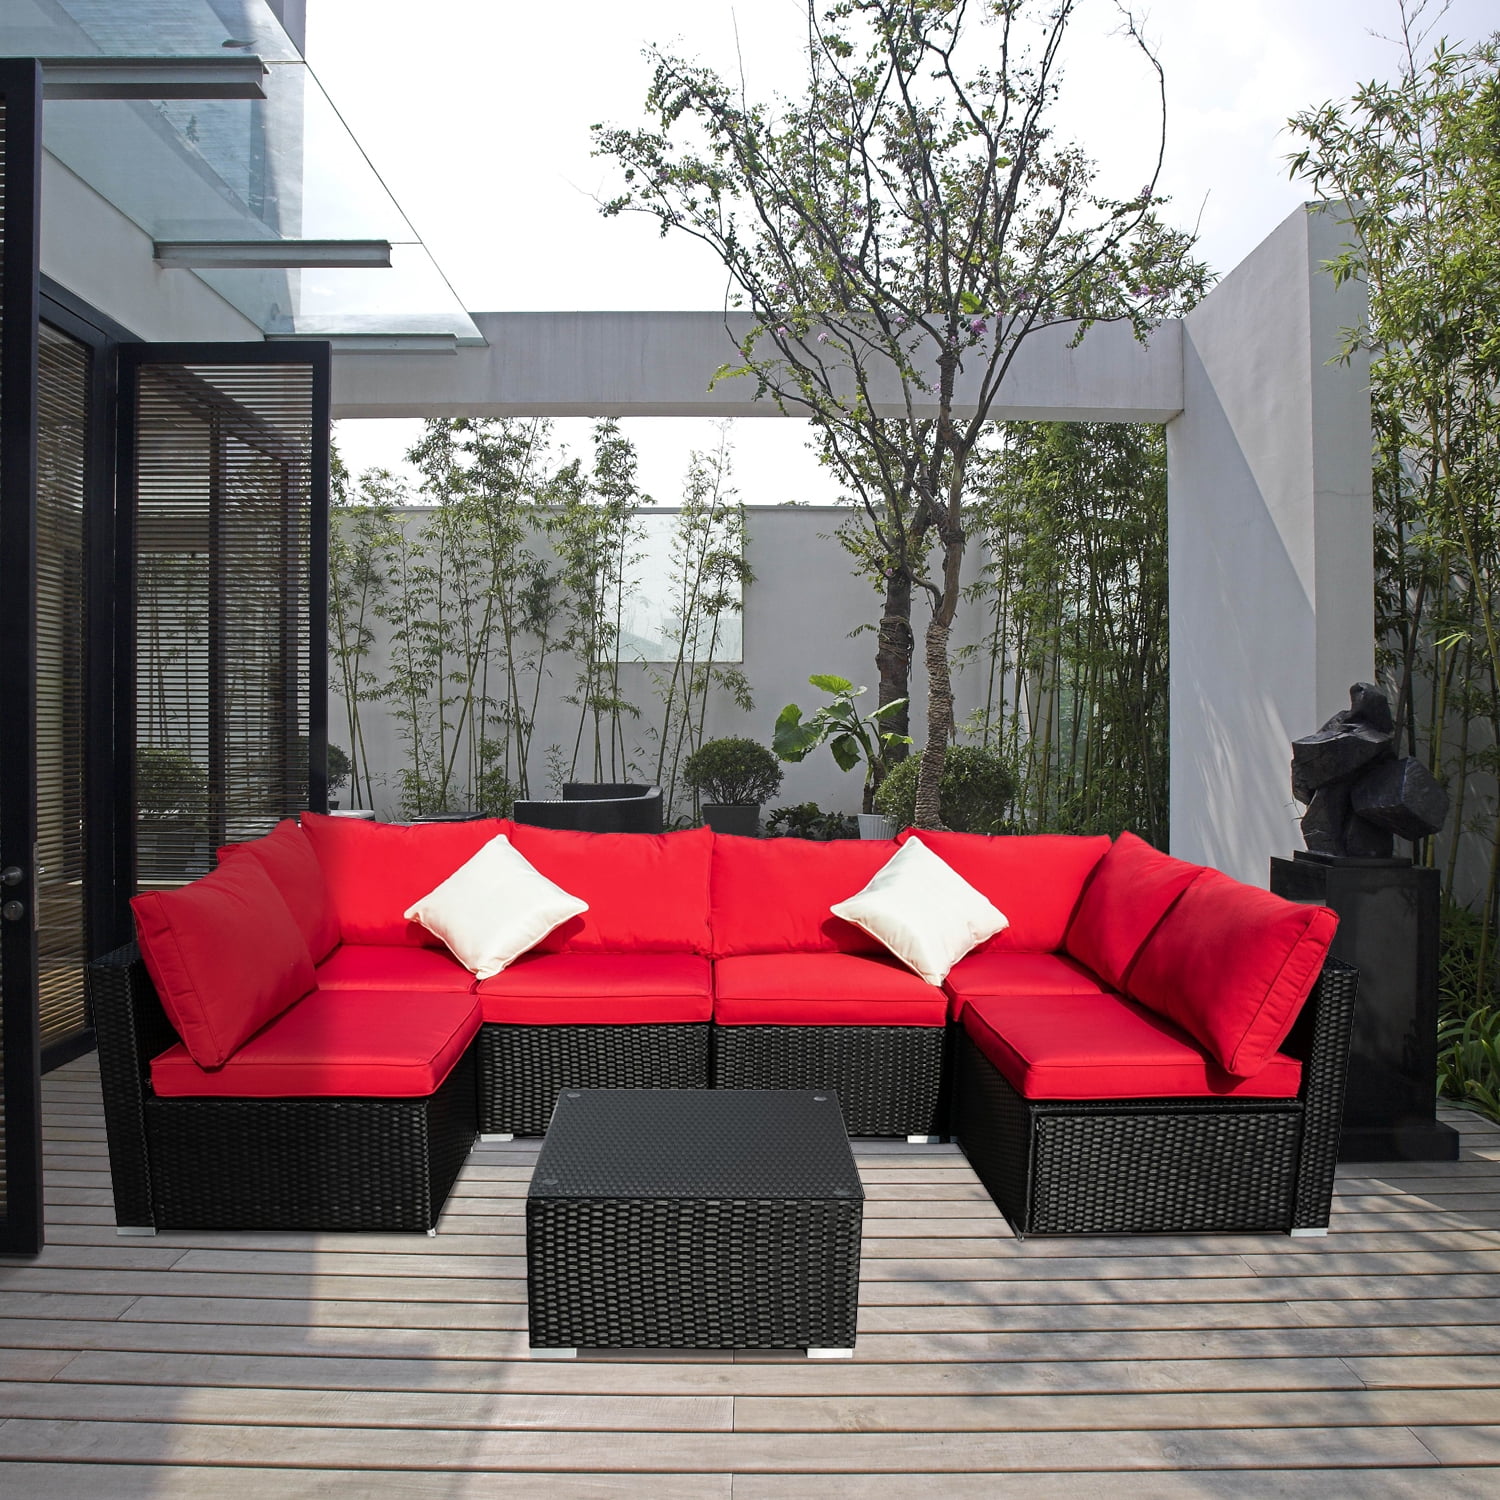 Outdoor Cushions - Patio Furniture - The Home Depot